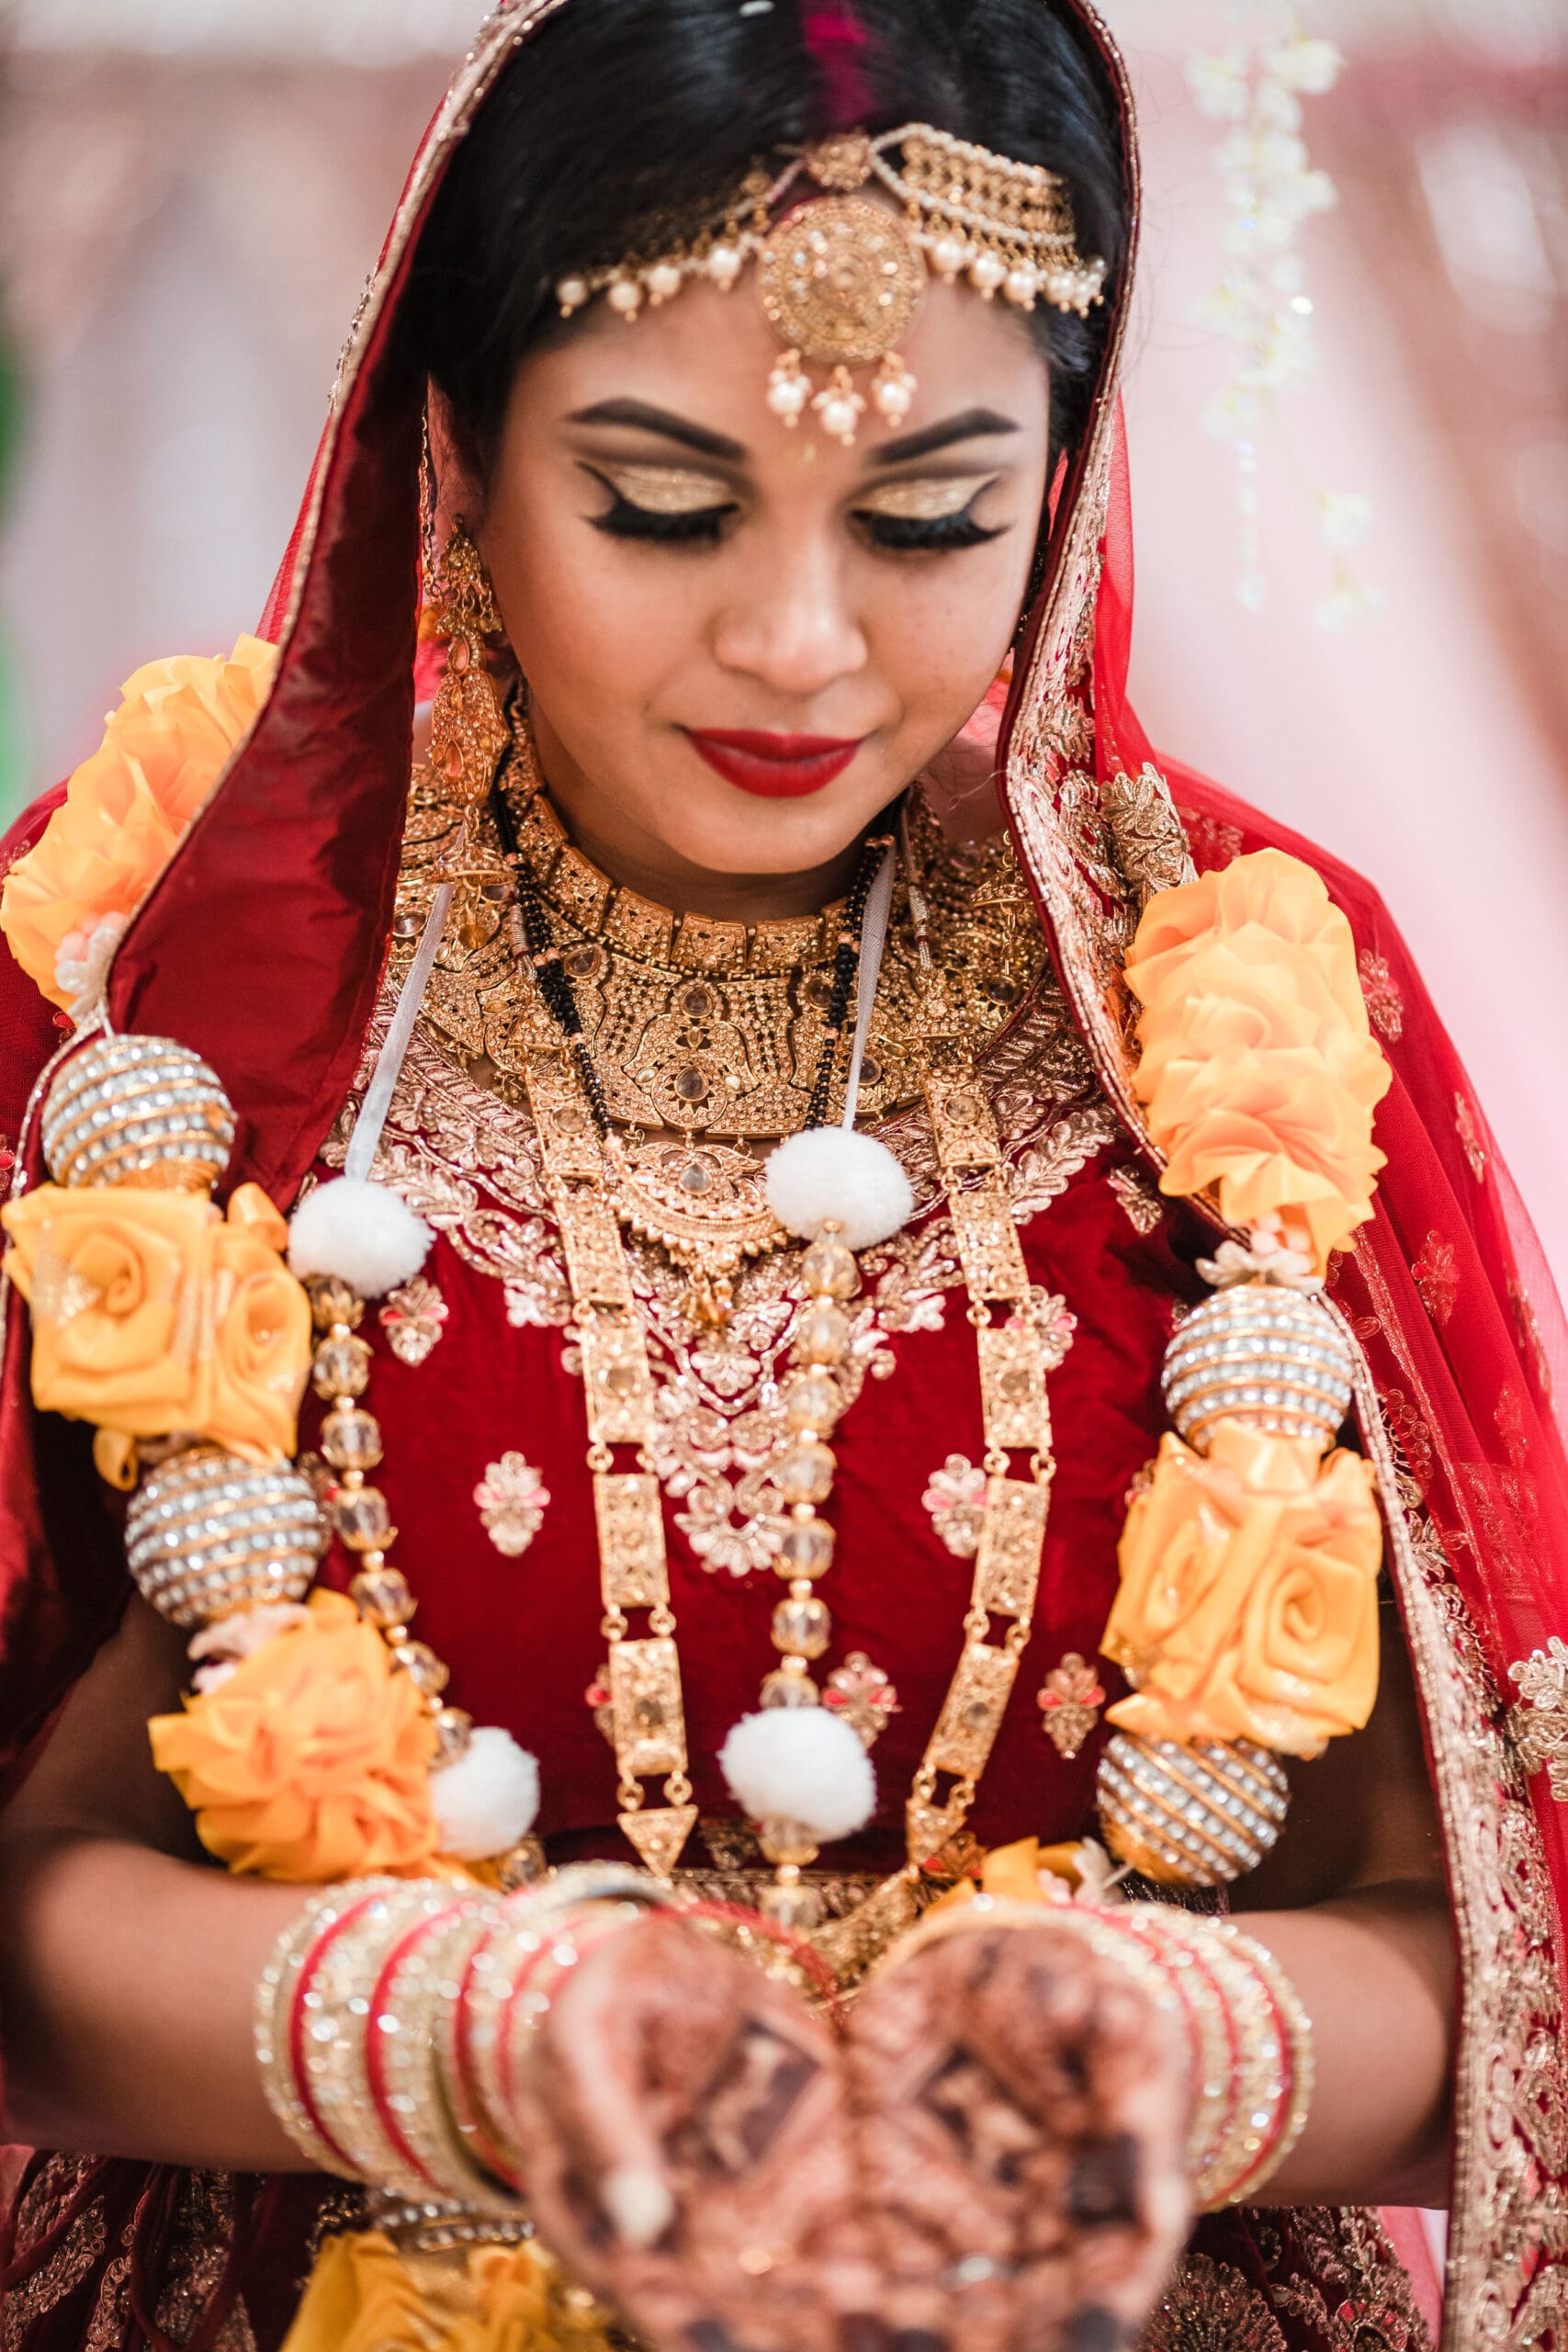 Solo portrait of the bride showcasing intricate henna designs on her hands, complementing her red and gold dress.